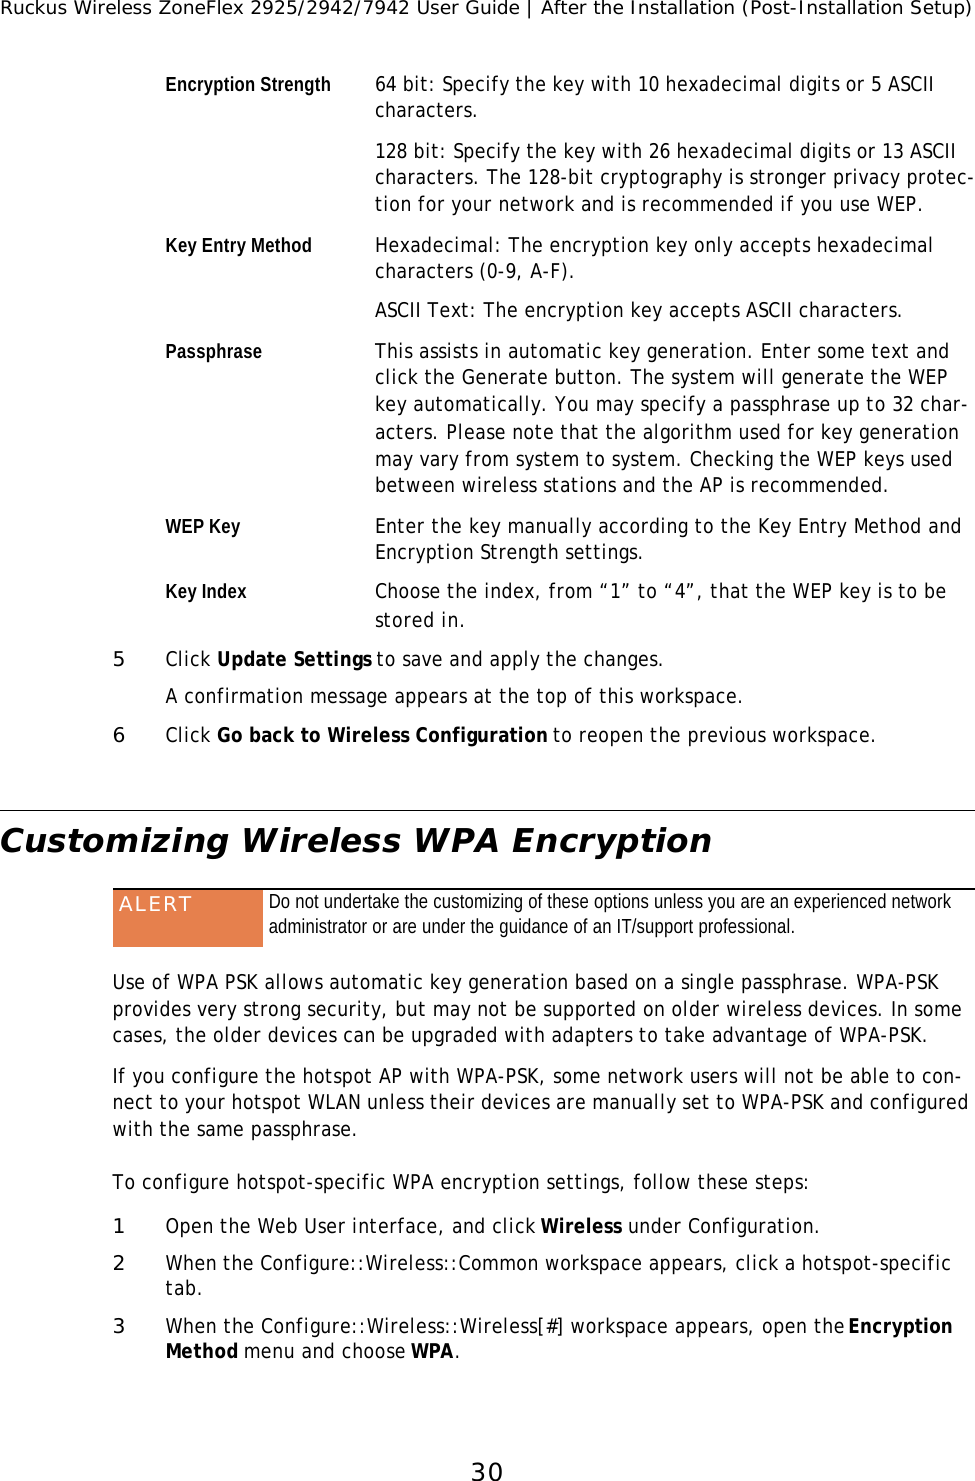 Ruckus Wireless ZoneFlex 2925/2942/7942 User Guide | After the Installation (Post-Installation Setup)30Encryption Strength 64 bit: Specify the key with 10 hexadecimal digits or 5 ASCII characters. 128 bit: Specify the key with 26 hexadecimal digits or 13 ASCII characters. The 128-bit cryptography is stronger privacy protec-tion for your network and is recommended if you use WEP.Key Entry Method Hexadecimal: The encryption key only accepts hexadecimal characters (0-9, A-F). ASCII Text: The encryption key accepts ASCII characters.Passphrase This assists in automatic key generation. Enter some text and click the Generate button. The system will generate the WEP key automatically. You may specify a passphrase up to 32 char-acters. Please note that the algorithm used for key generation may vary from system to system. Checking the WEP keys used between wireless stations and the AP is recommended.WEP Key Enter the key manually according to the Key Entry Method and Encryption Strength settings.Key Index Choose the index, from “1” to “4”, that the WEP key is to be stored in.5Click Update Settings to save and apply the changes.A confirmation message appears at the top of this workspace. 6Click Go back to Wireless Configuration to reopen the previous workspace.Customizing Wireless WPA Encryption Use of WPA PSK allows automatic key generation based on a single passphrase. WPA-PSK provides very strong security, but may not be supported on older wireless devices. In some cases, the older devices can be upgraded with adapters to take advantage of WPA-PSK. If you configure the hotspot AP with WPA-PSK, some network users will not be able to con-nect to your hotspot WLAN unless their devices are manually set to WPA-PSK and configured with the same passphrase.To configure hotspot-specific WPA encryption settings, follow these steps:1Open the Web User interface, and click Wireless under Configuration.2When the Configure::Wireless::Common workspace appears, click a hotspot-specific tab.3When the Configure::Wireless::Wireless[#] workspace appears, open the Encryption Method menu and choose WPA. ALERT Do not undertake the customizing of these options unless you are an experienced network administrator or are under the guidance of an IT/support professional.